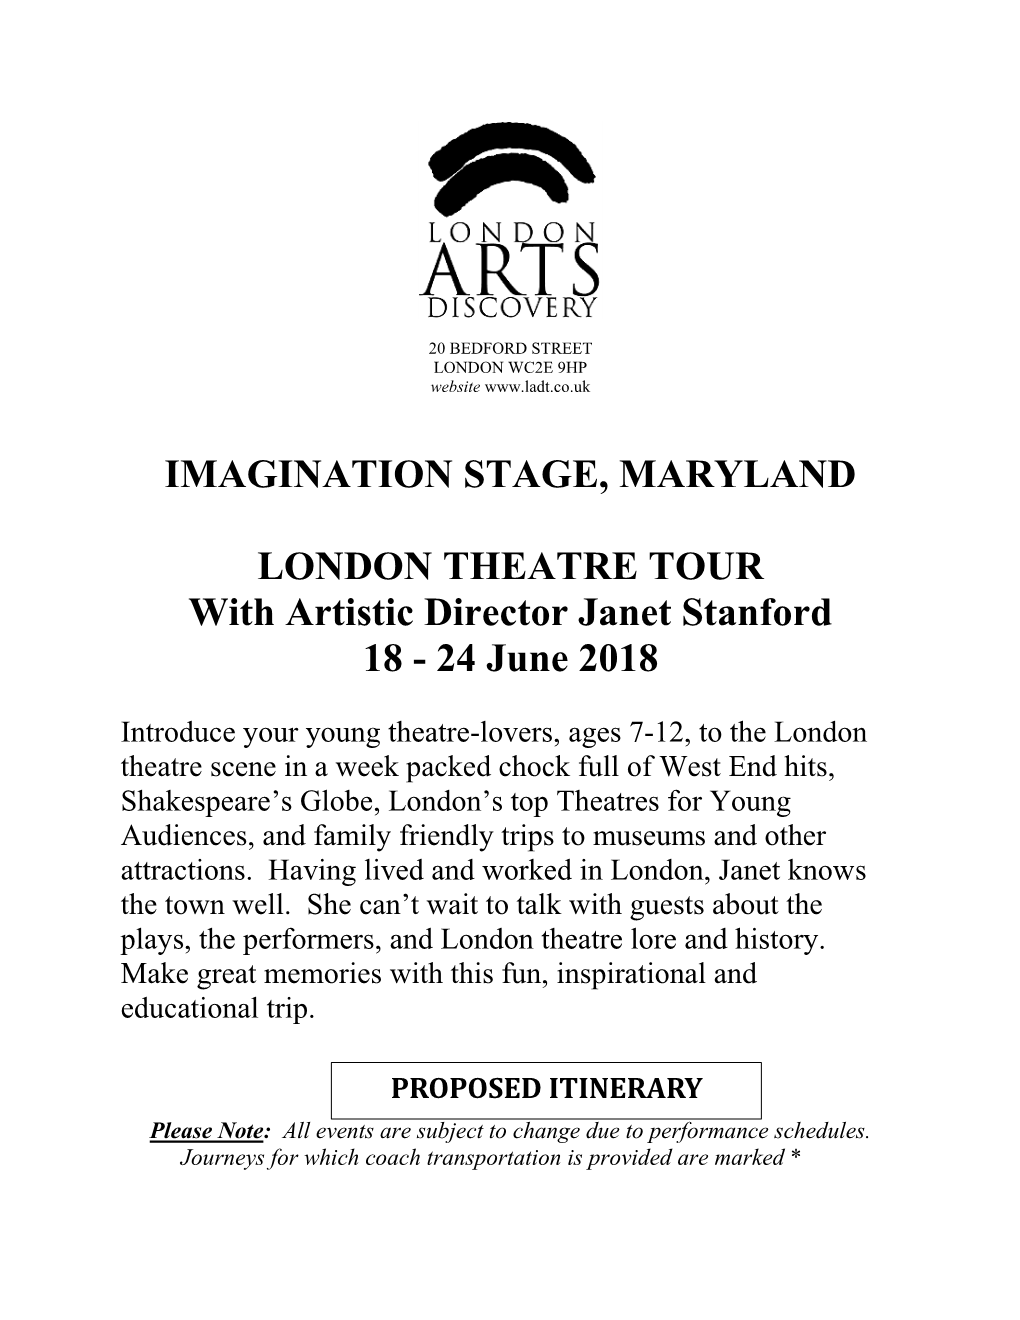 IMAGINATION STAGE, MARYLAND LONDON THEATRE TOUR with Artistic Director Janet Stanford 18